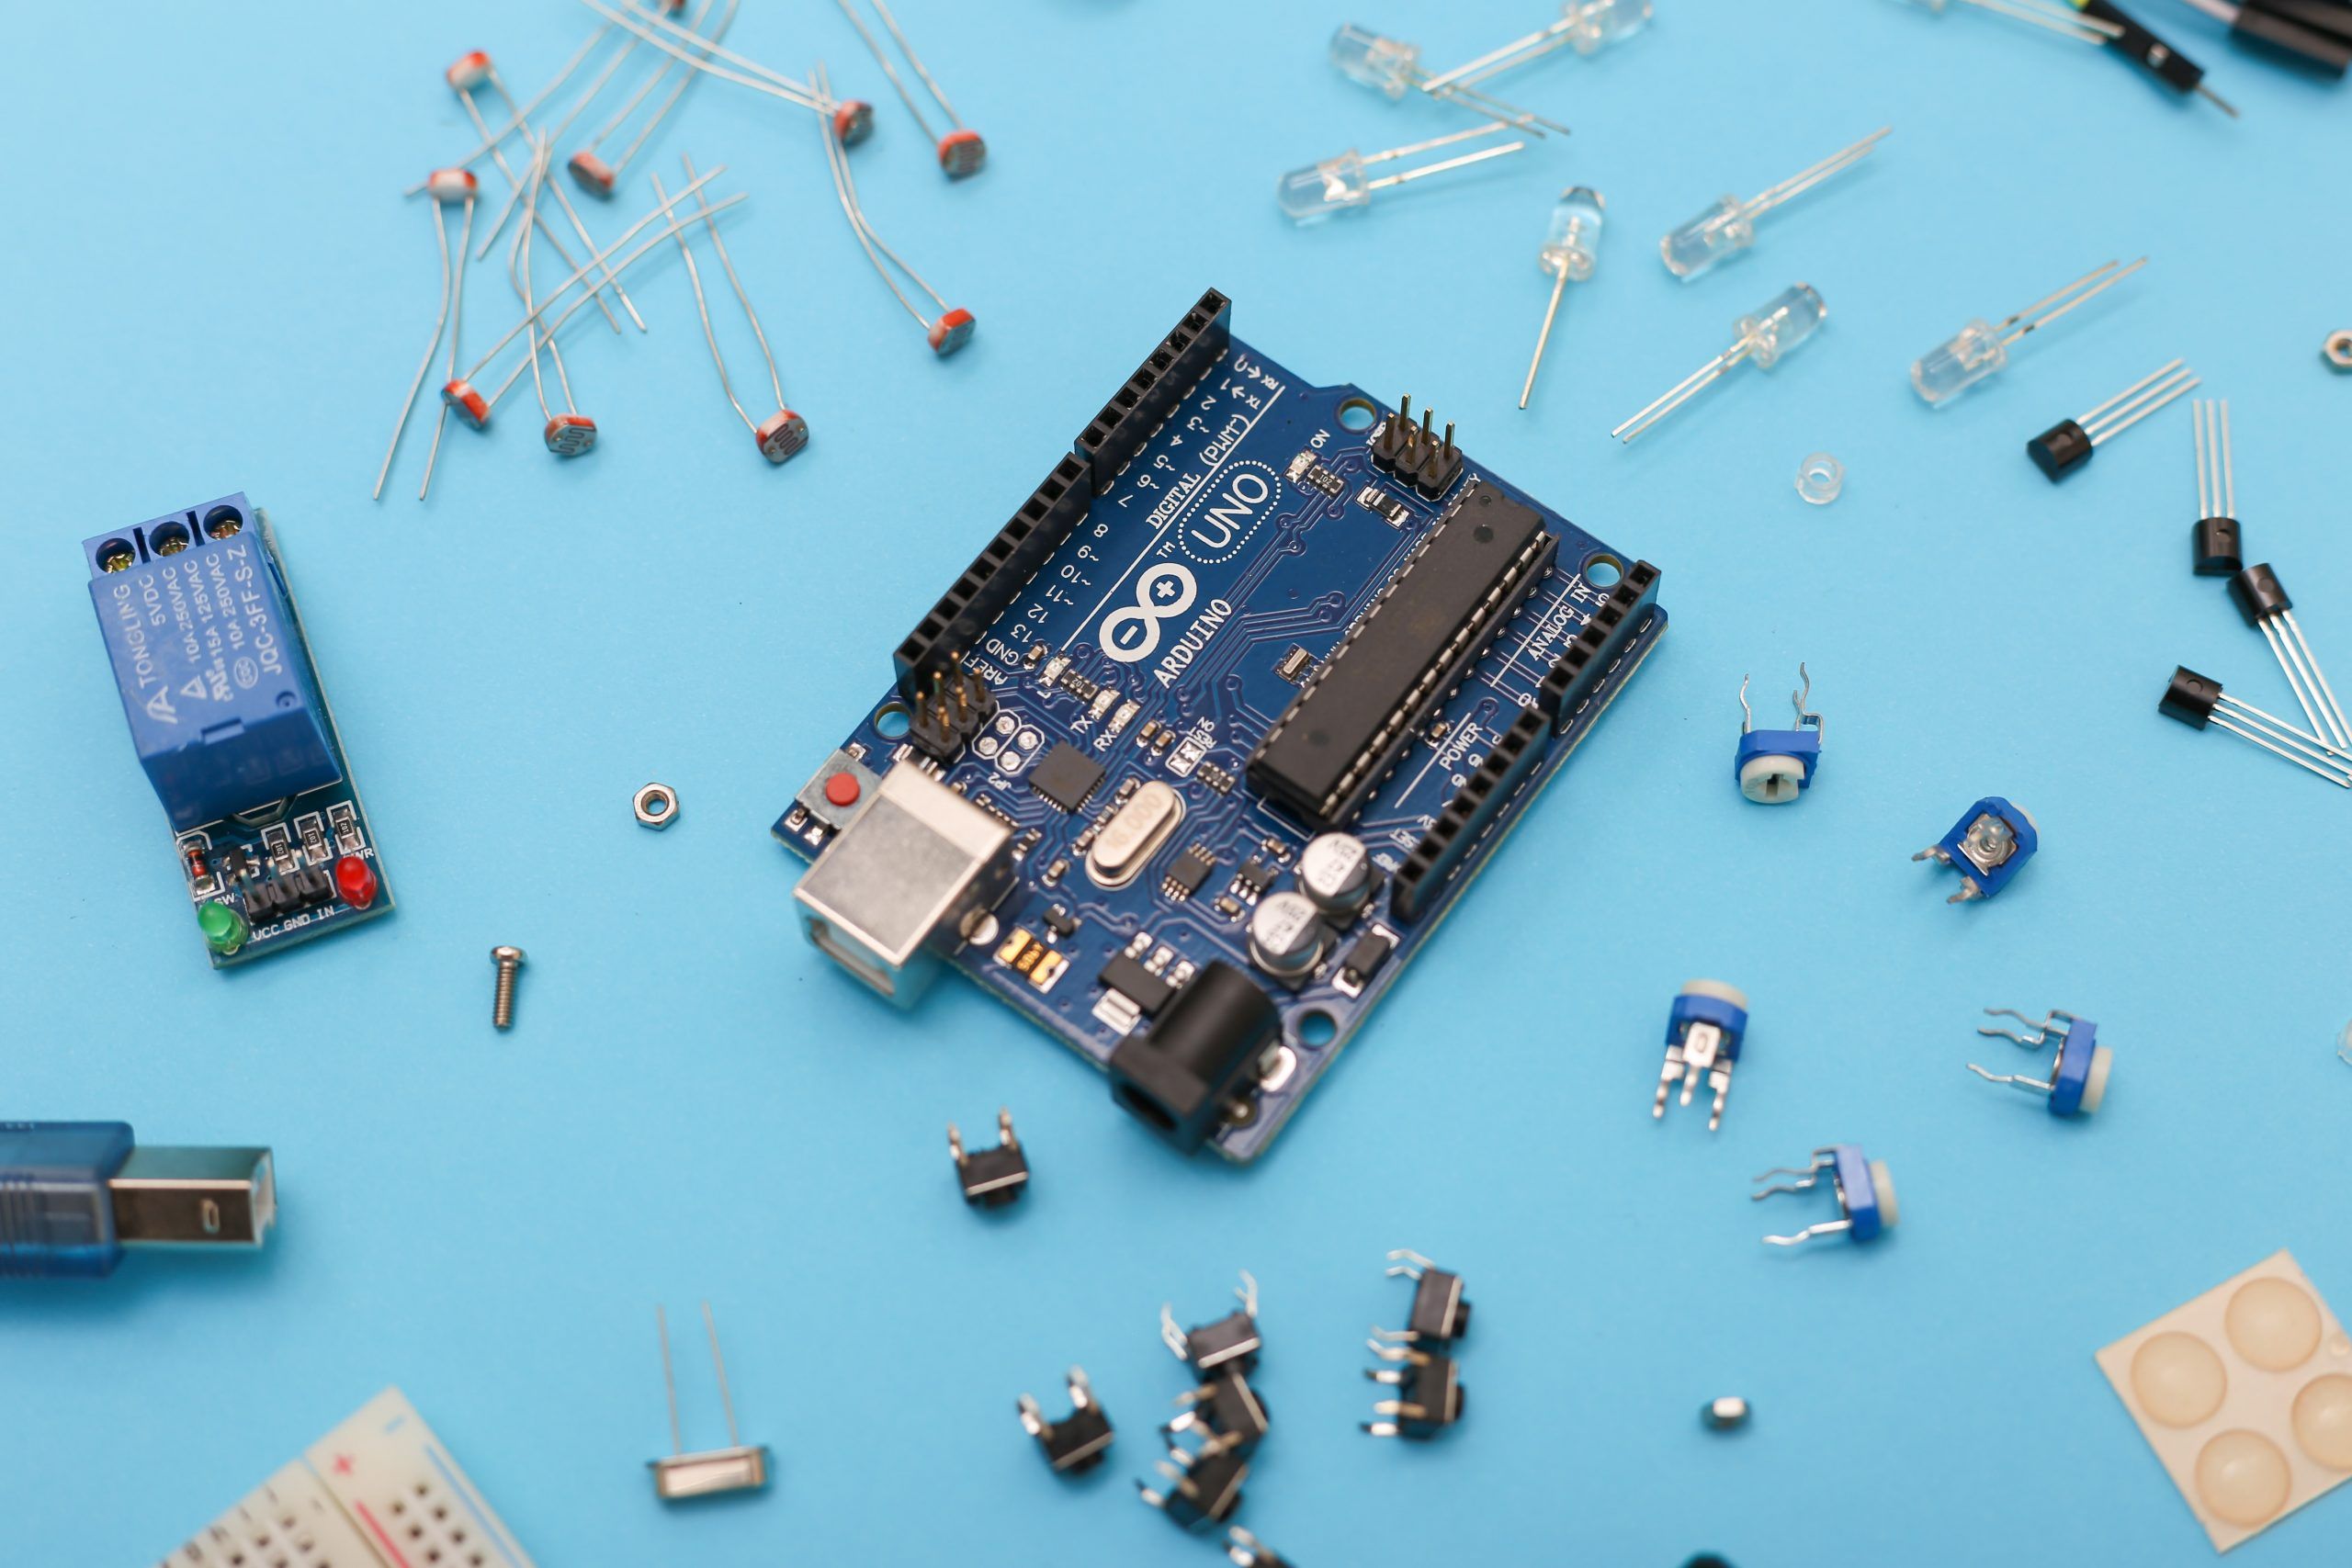 Physical computing with Arduino